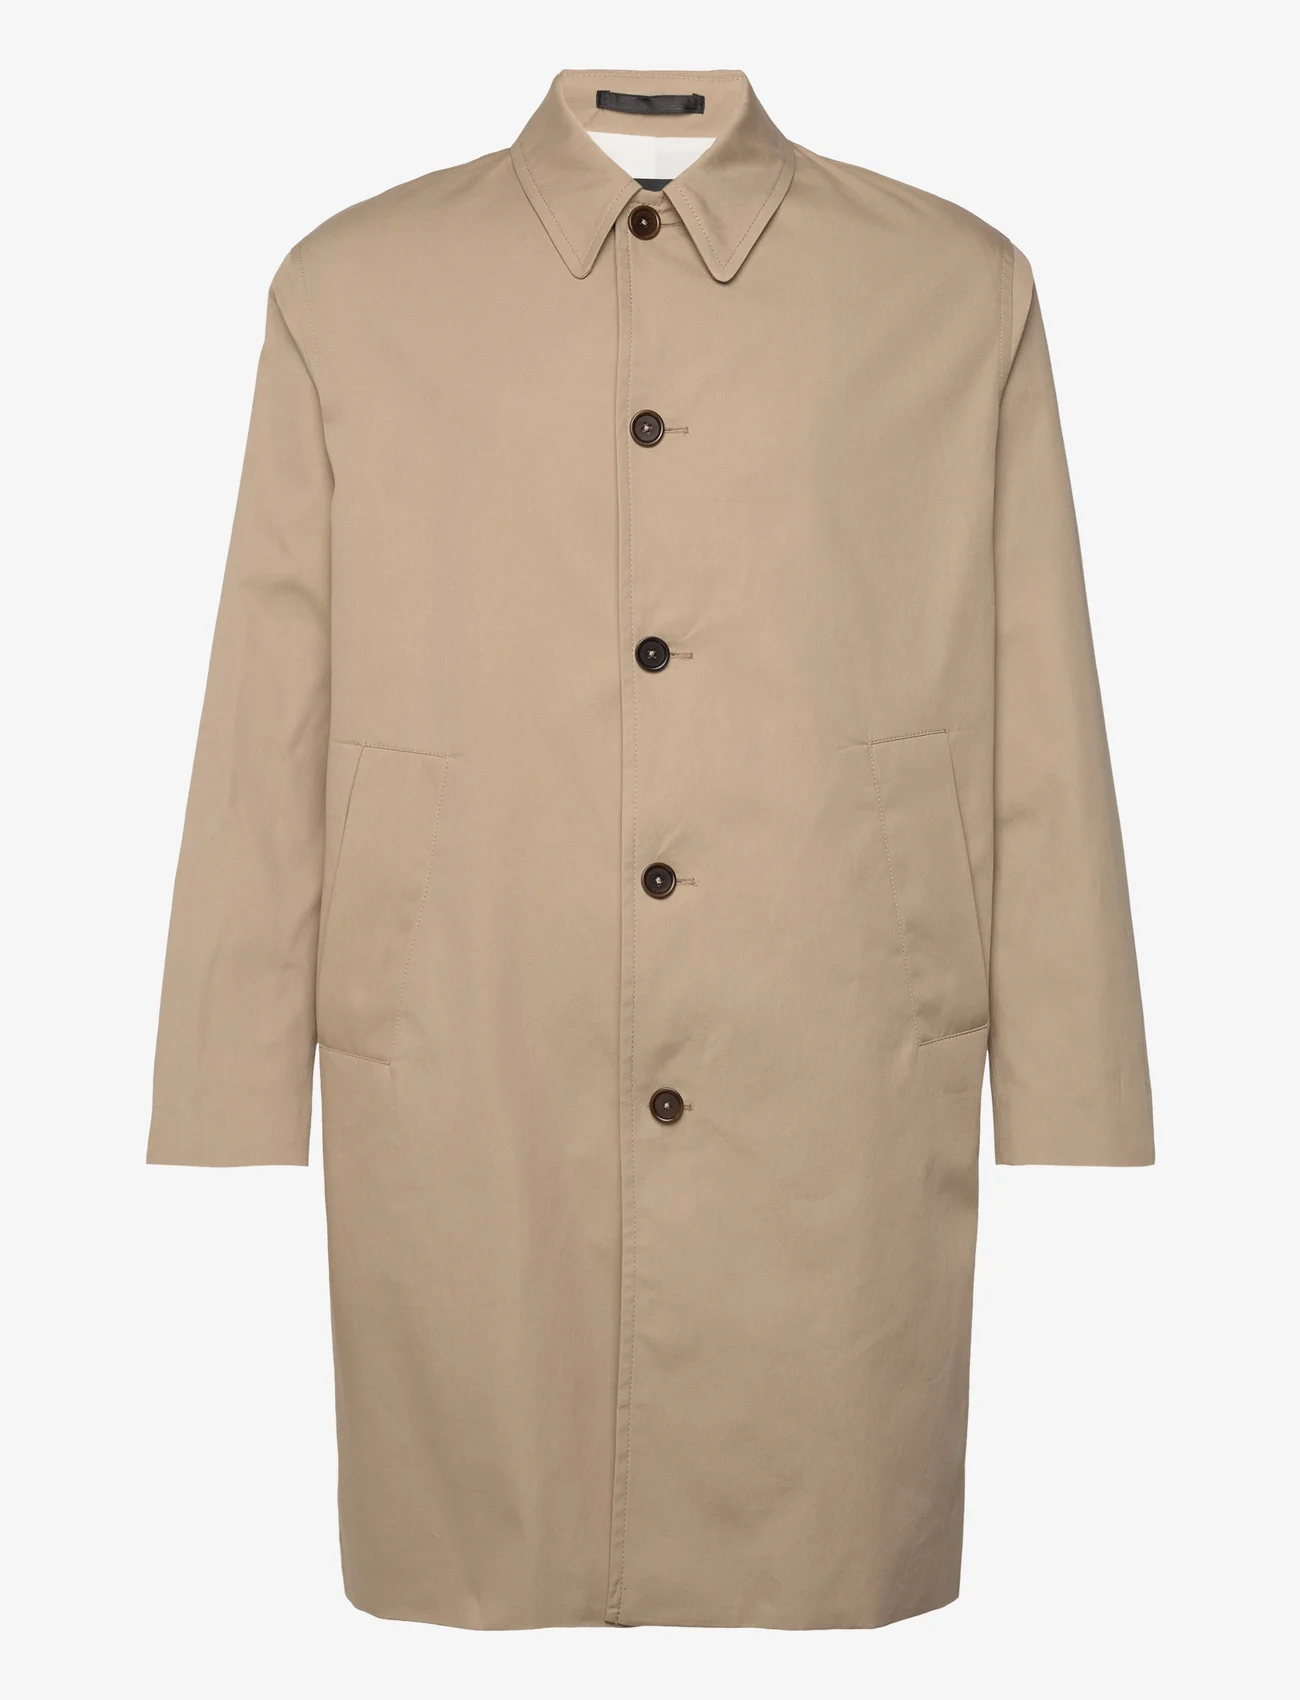 Mads Nørgaard - Dry Cotton Curtis Coat - Õhukesed mantlid - trench coat - 0